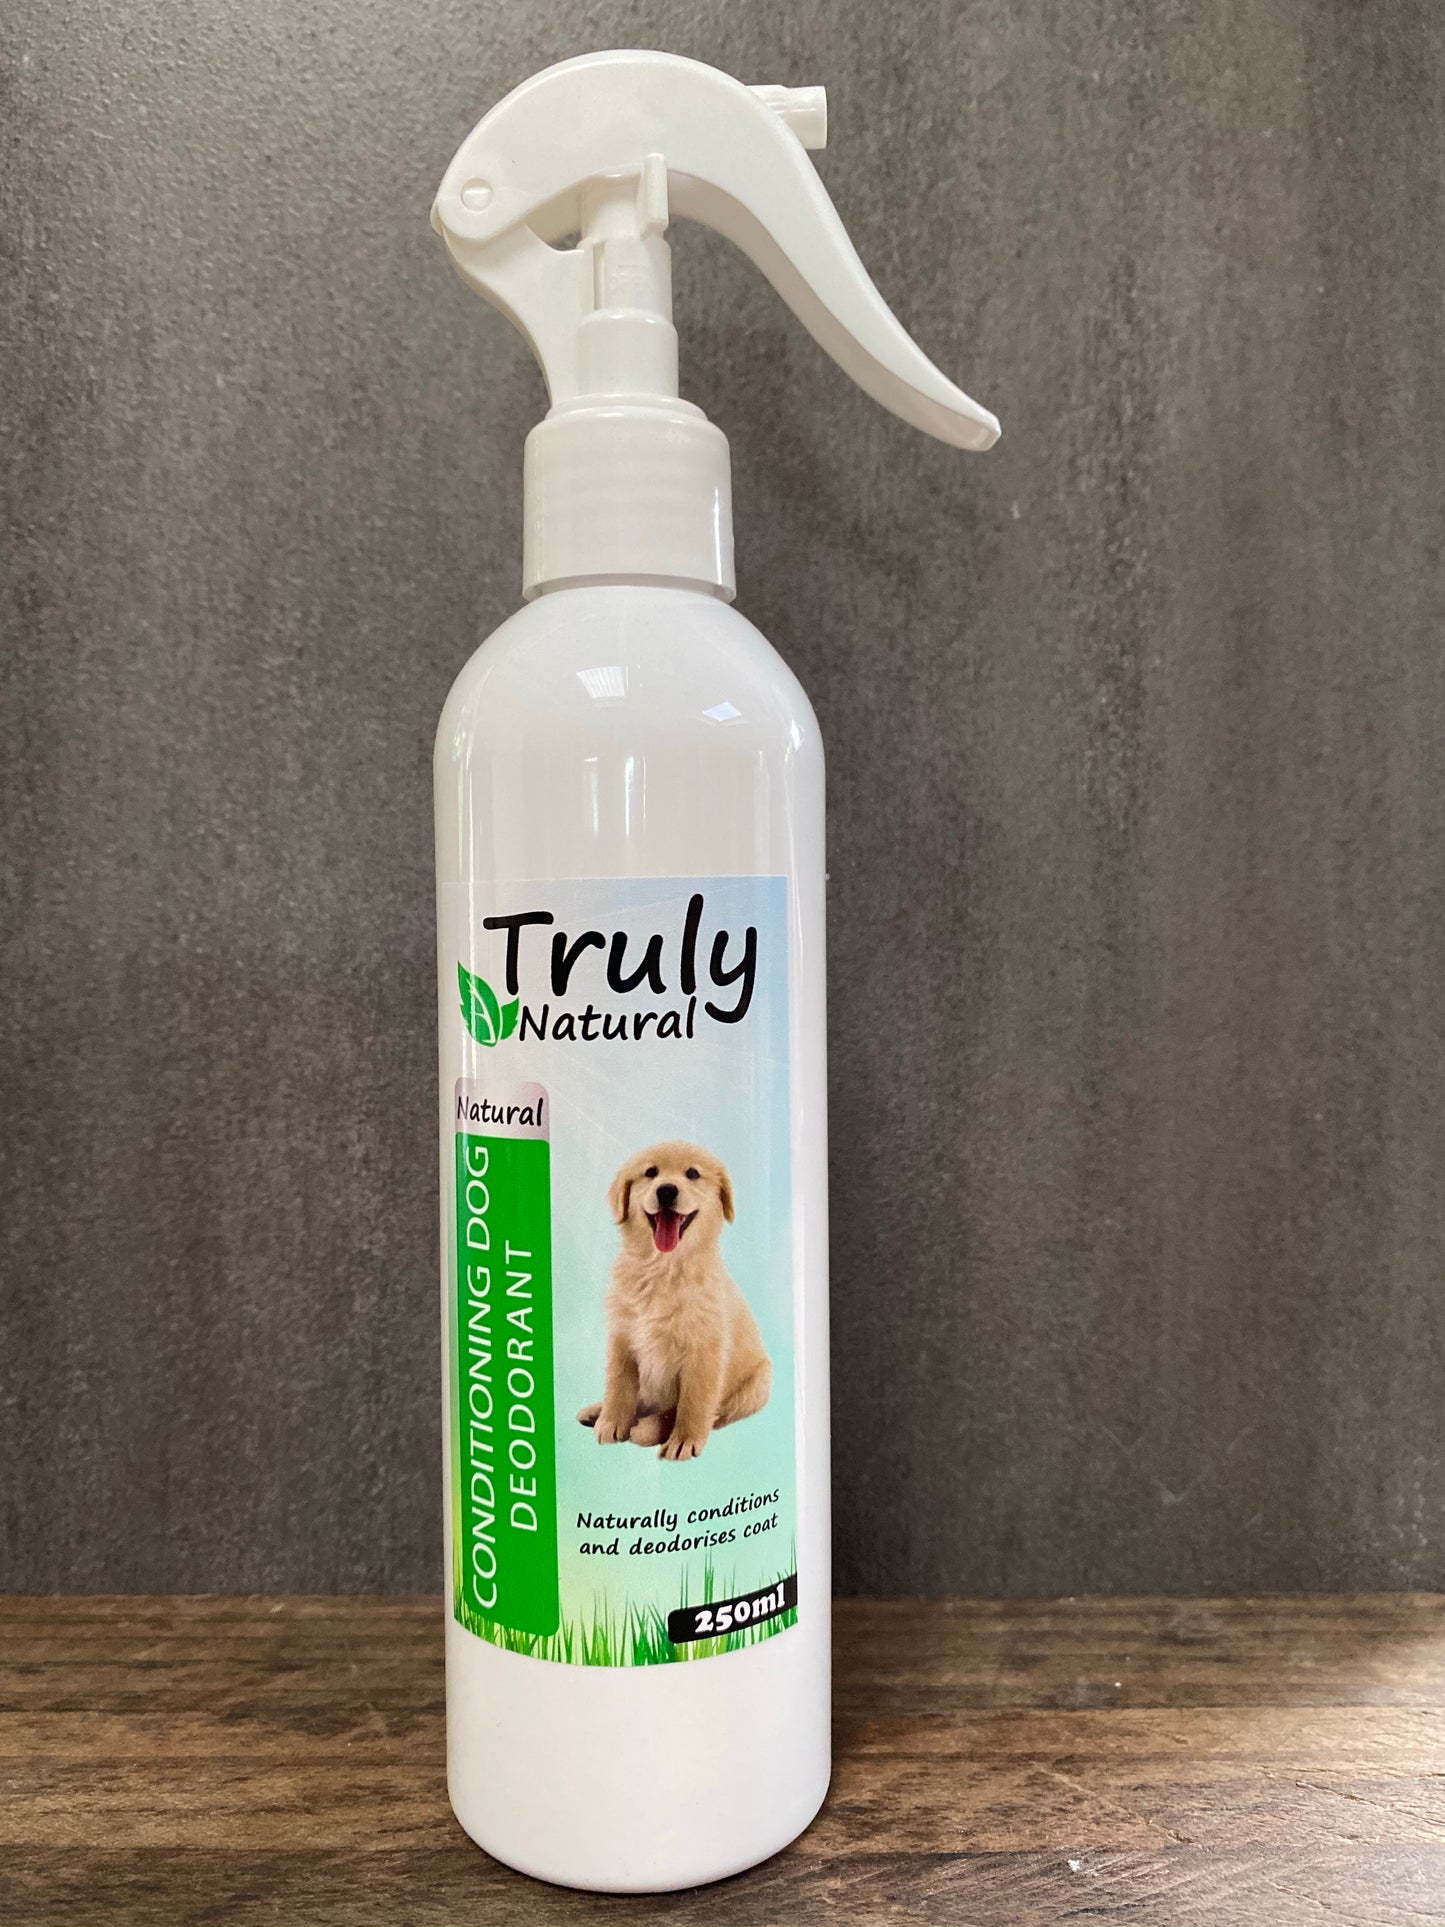 Truly Natural natural conditioning dog deodorant spray 250ml